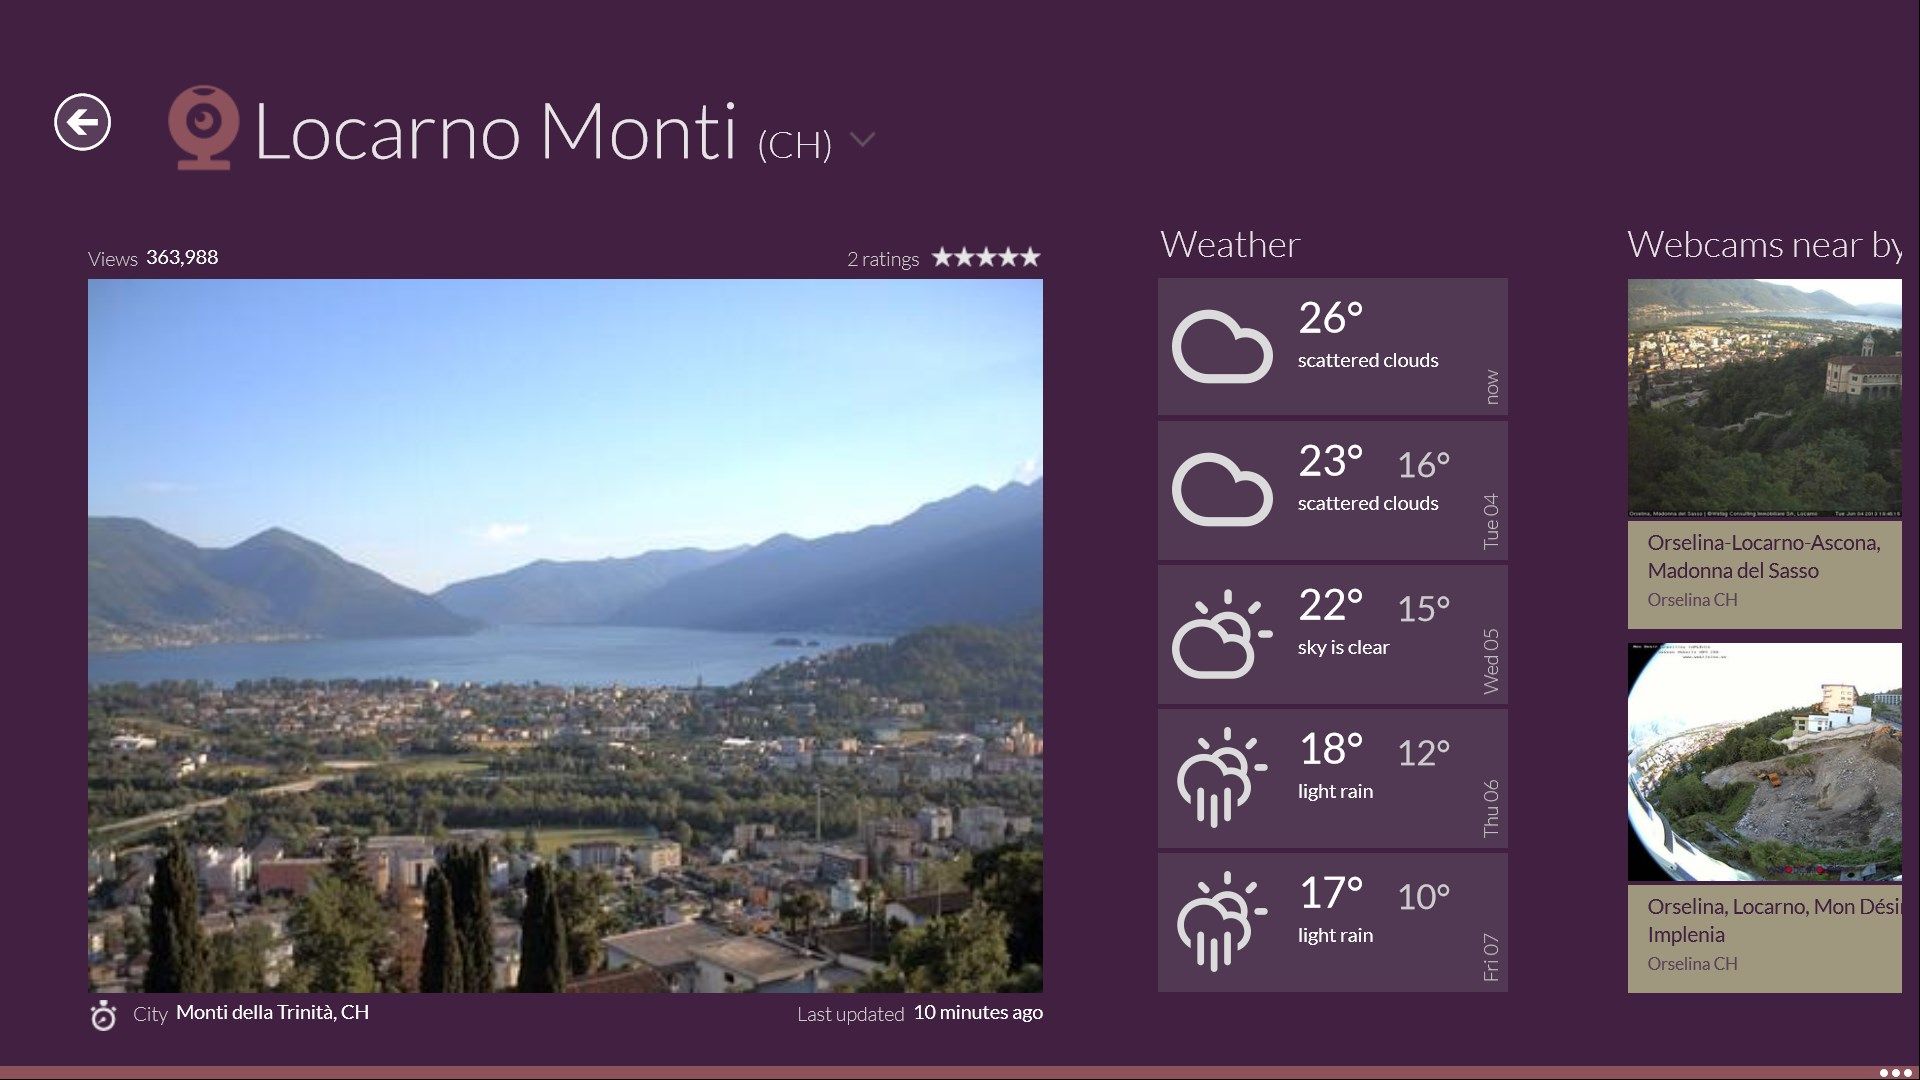 Webcam details page with weather forecasts [pro version]